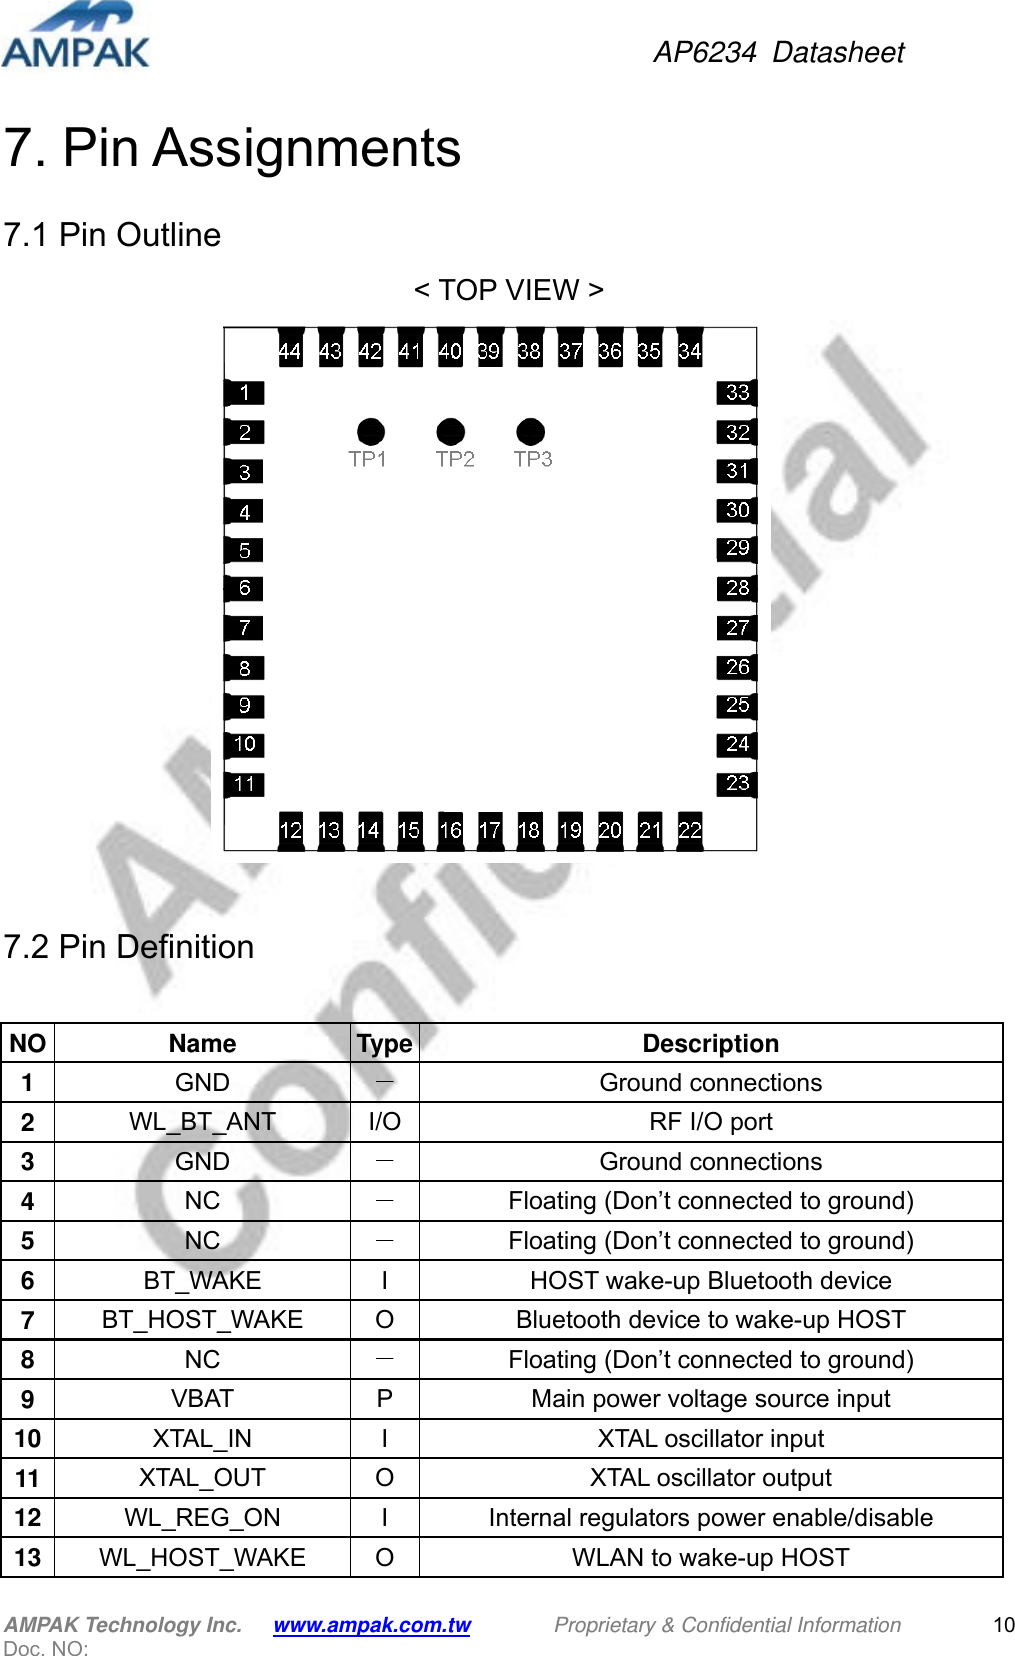 AP6234 Datasheet AMPAK Technology Inc.      www.ampak.com.tw        Proprietary &amp; Confidential Information       Doc. NO:   107. Pin Assignments 7.1 Pin Outline &lt; TOP VIEW &gt;   7.2 Pin Definition  NO Name Type Description 1  GND  － Ground connections 2  WL_BT_ANT  I/O RF I/O port 3  GND  － Ground connections 4  NC  － Floating (Don’t connected to ground) 5  NC  － Floating (Don’t connected to ground) 6  BT_WAKE  I  HOST wake-up Bluetooth device 7  BT_HOST_WAKE  O  Bluetooth device to wake-up HOST 8  NC  － Floating (Don’t connected to ground) 9  VBAT  P  Main power voltage source input 10  XTAL_IN  I  XTAL oscillator input 11  XTAL_OUT  O  XTAL oscillator output 12  WL_REG_ON I Internal regulators power enable/disable 13  WL_HOST_WAKE  O  WLAN to wake-up HOST 